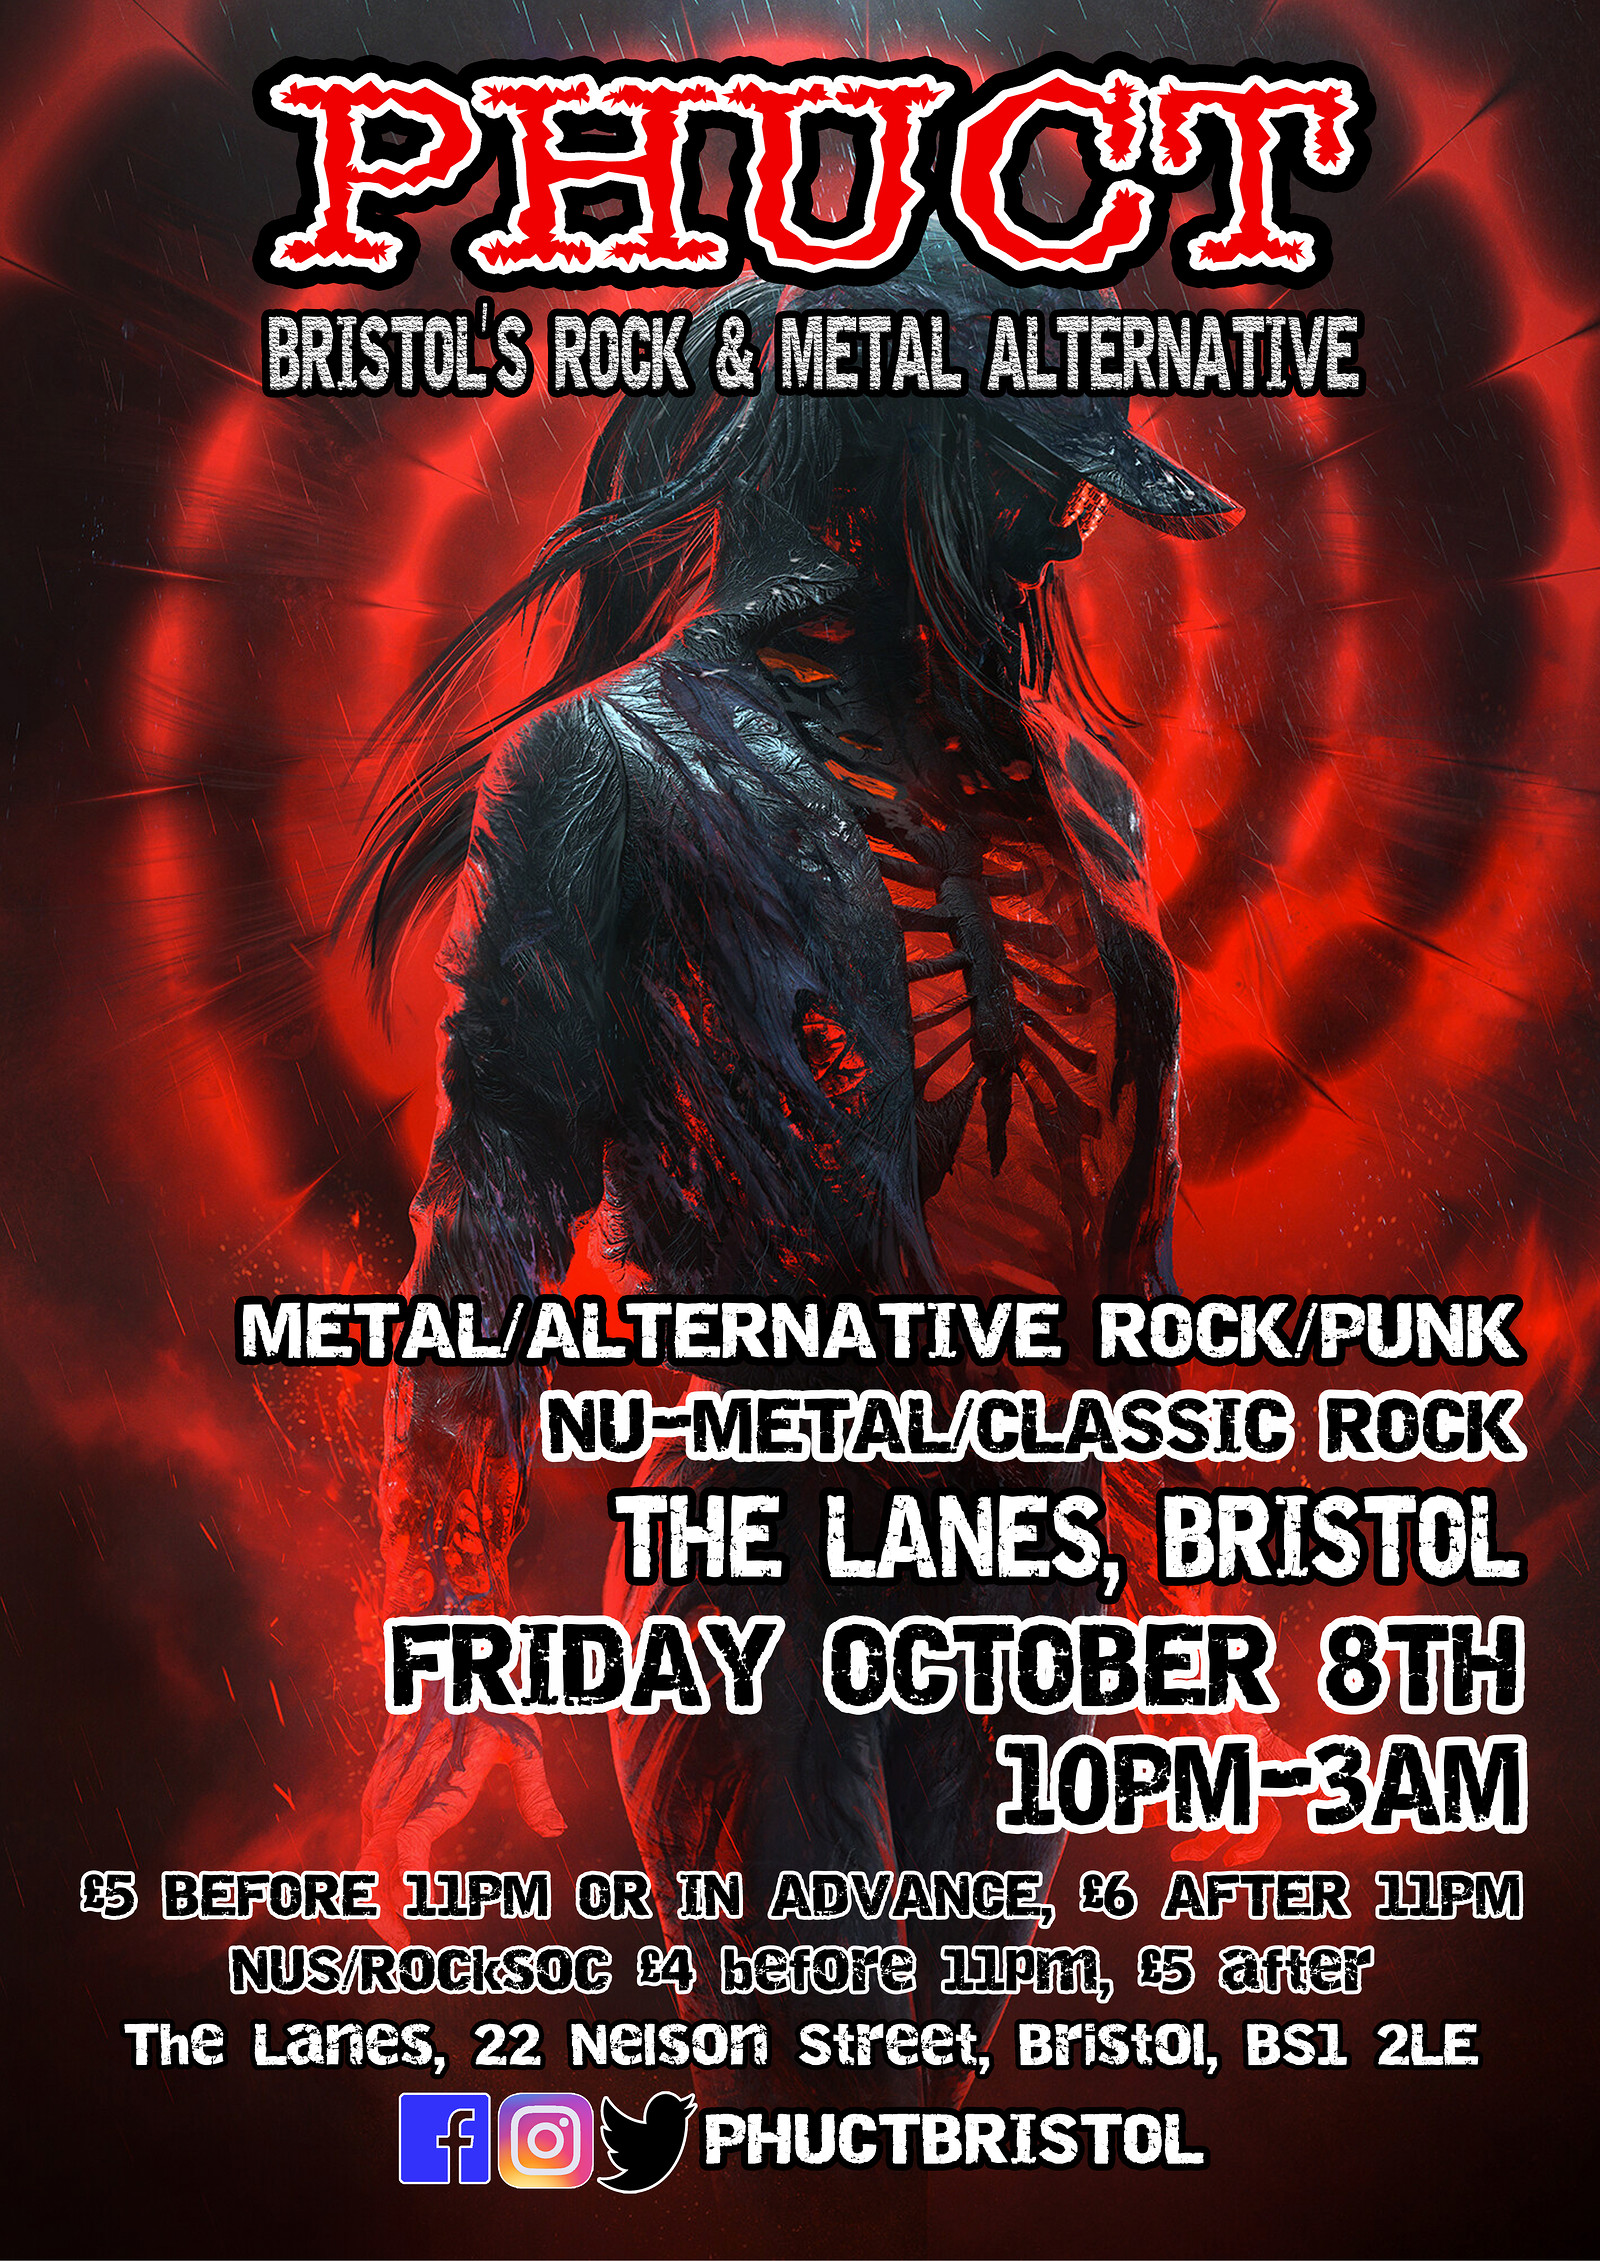 PHUCT - Bristol's rock and metal alternative at The Lanes